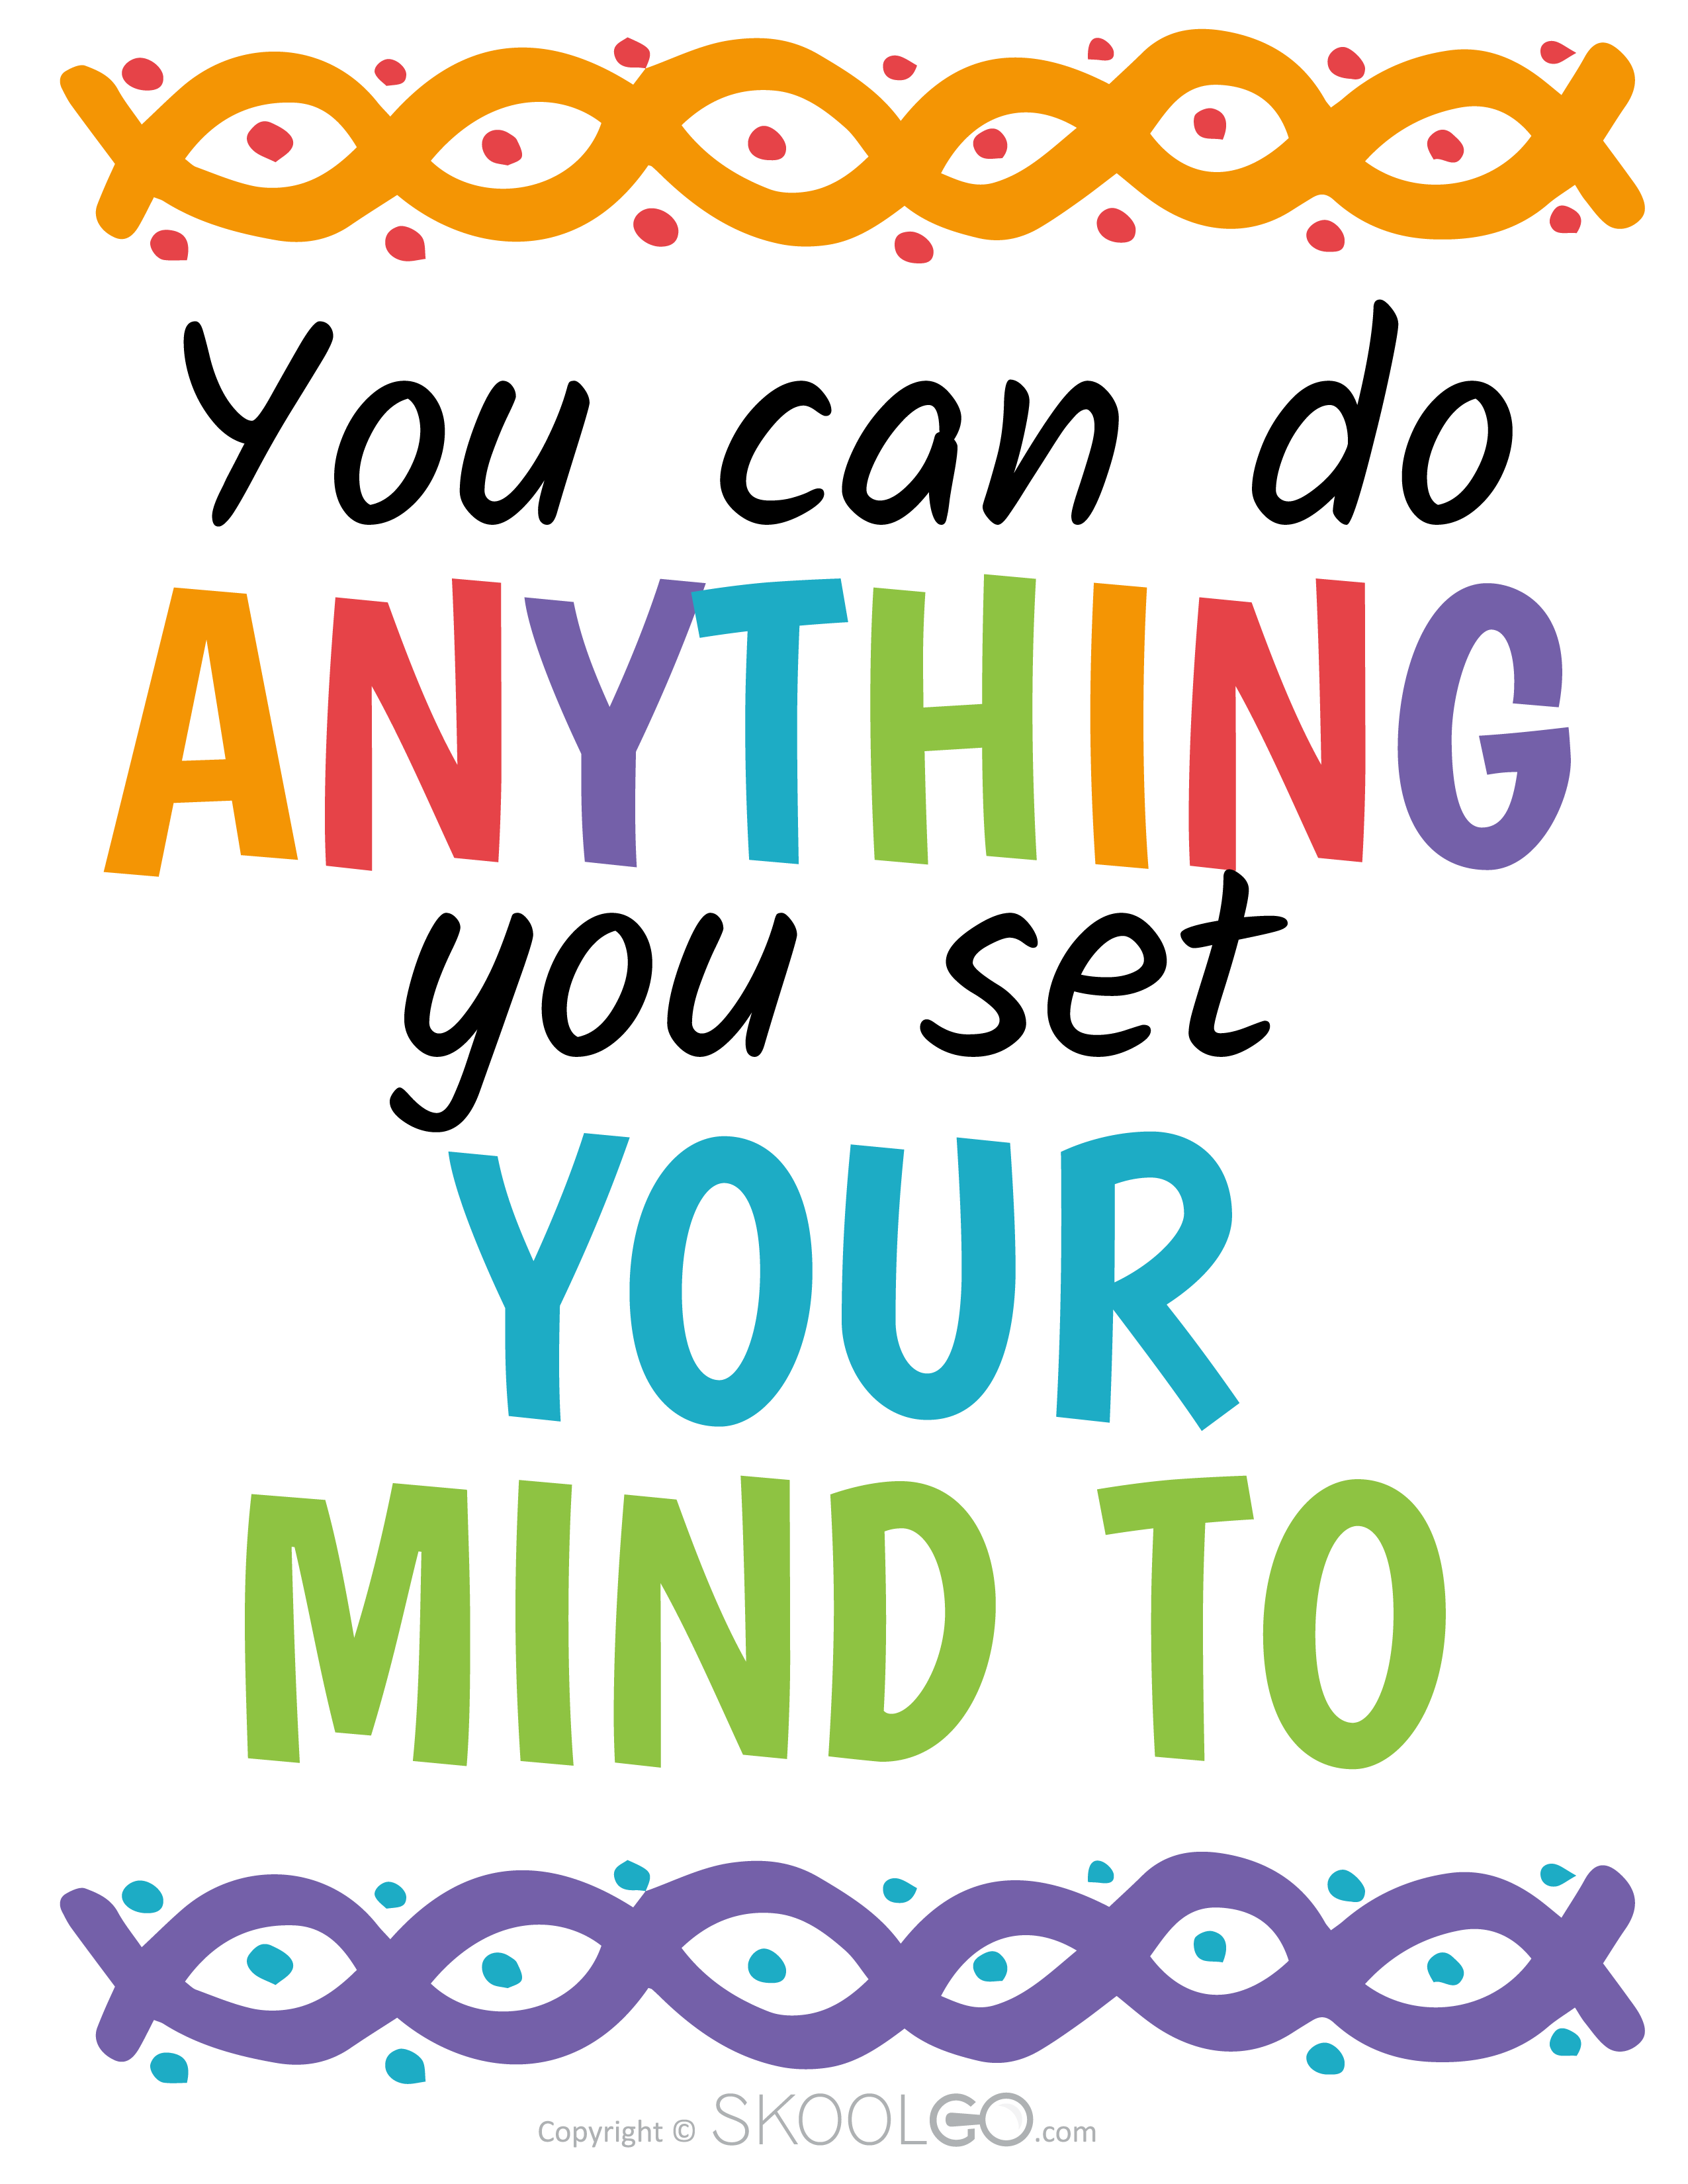 You Can Do Anything You Set Your Mind To - Free Poster